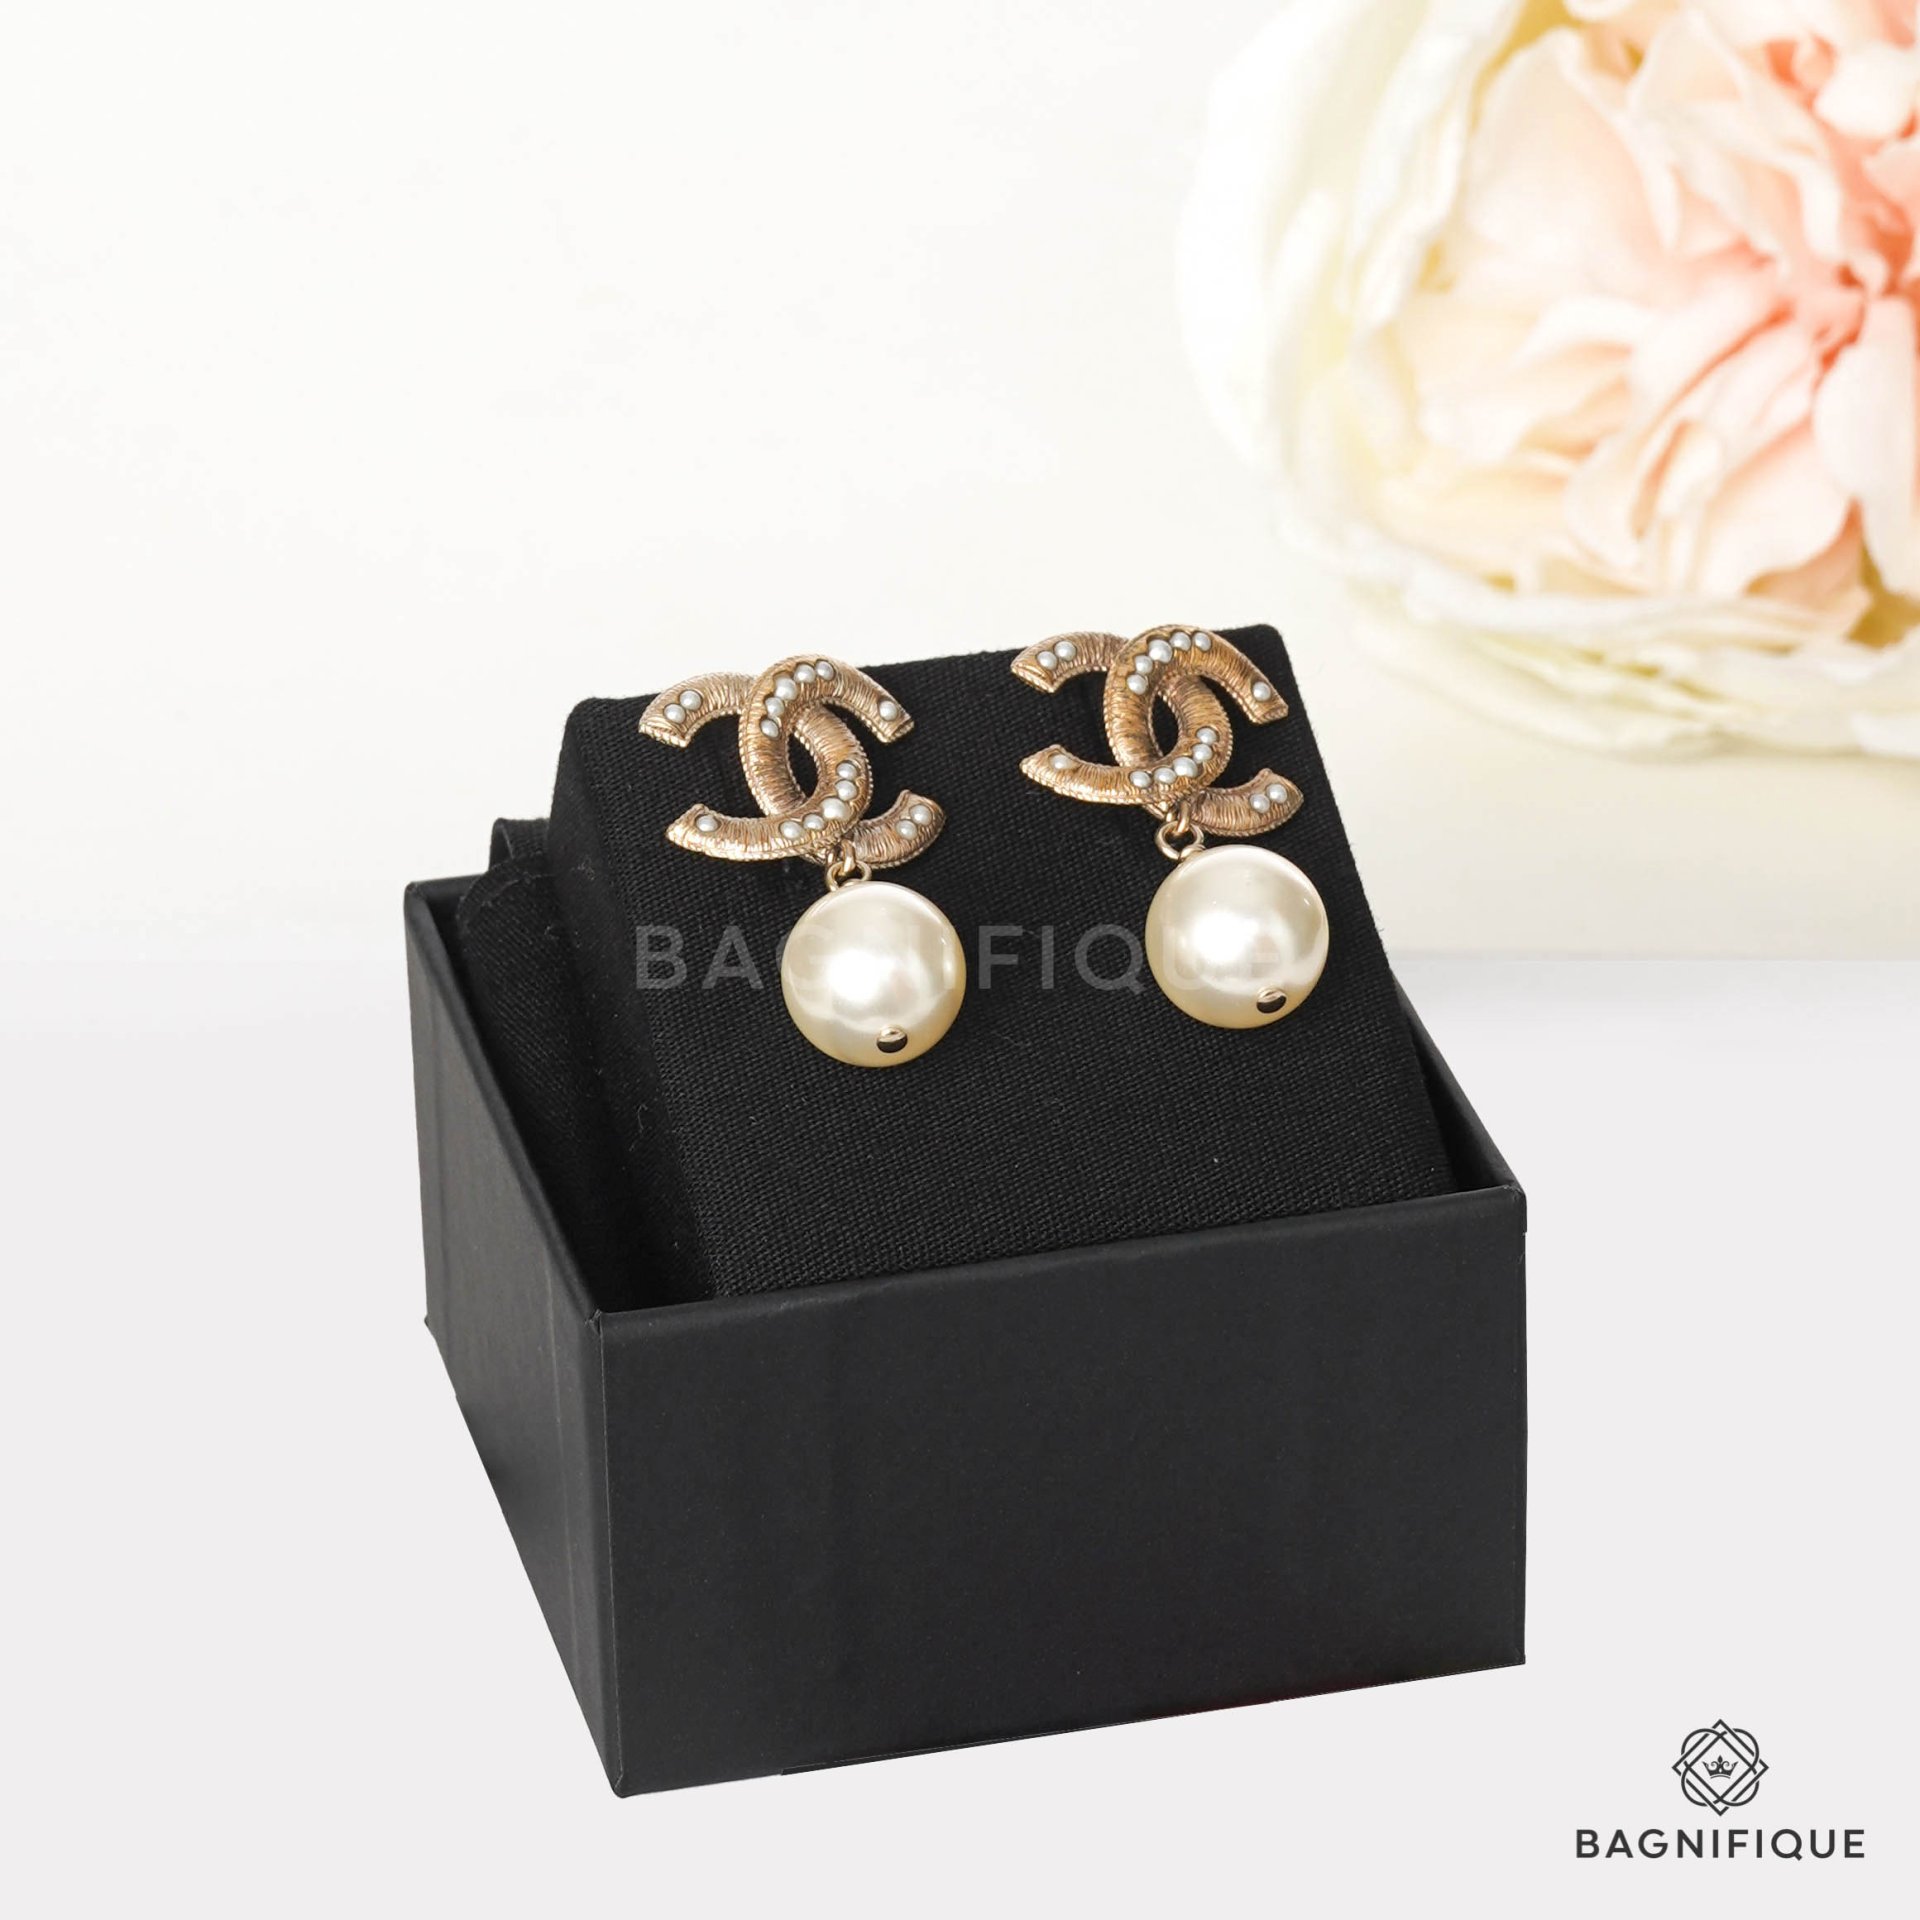 CHANEL EARRINGS WITH PEARL 2 CM GOLD GHW - bagnifiquethailand